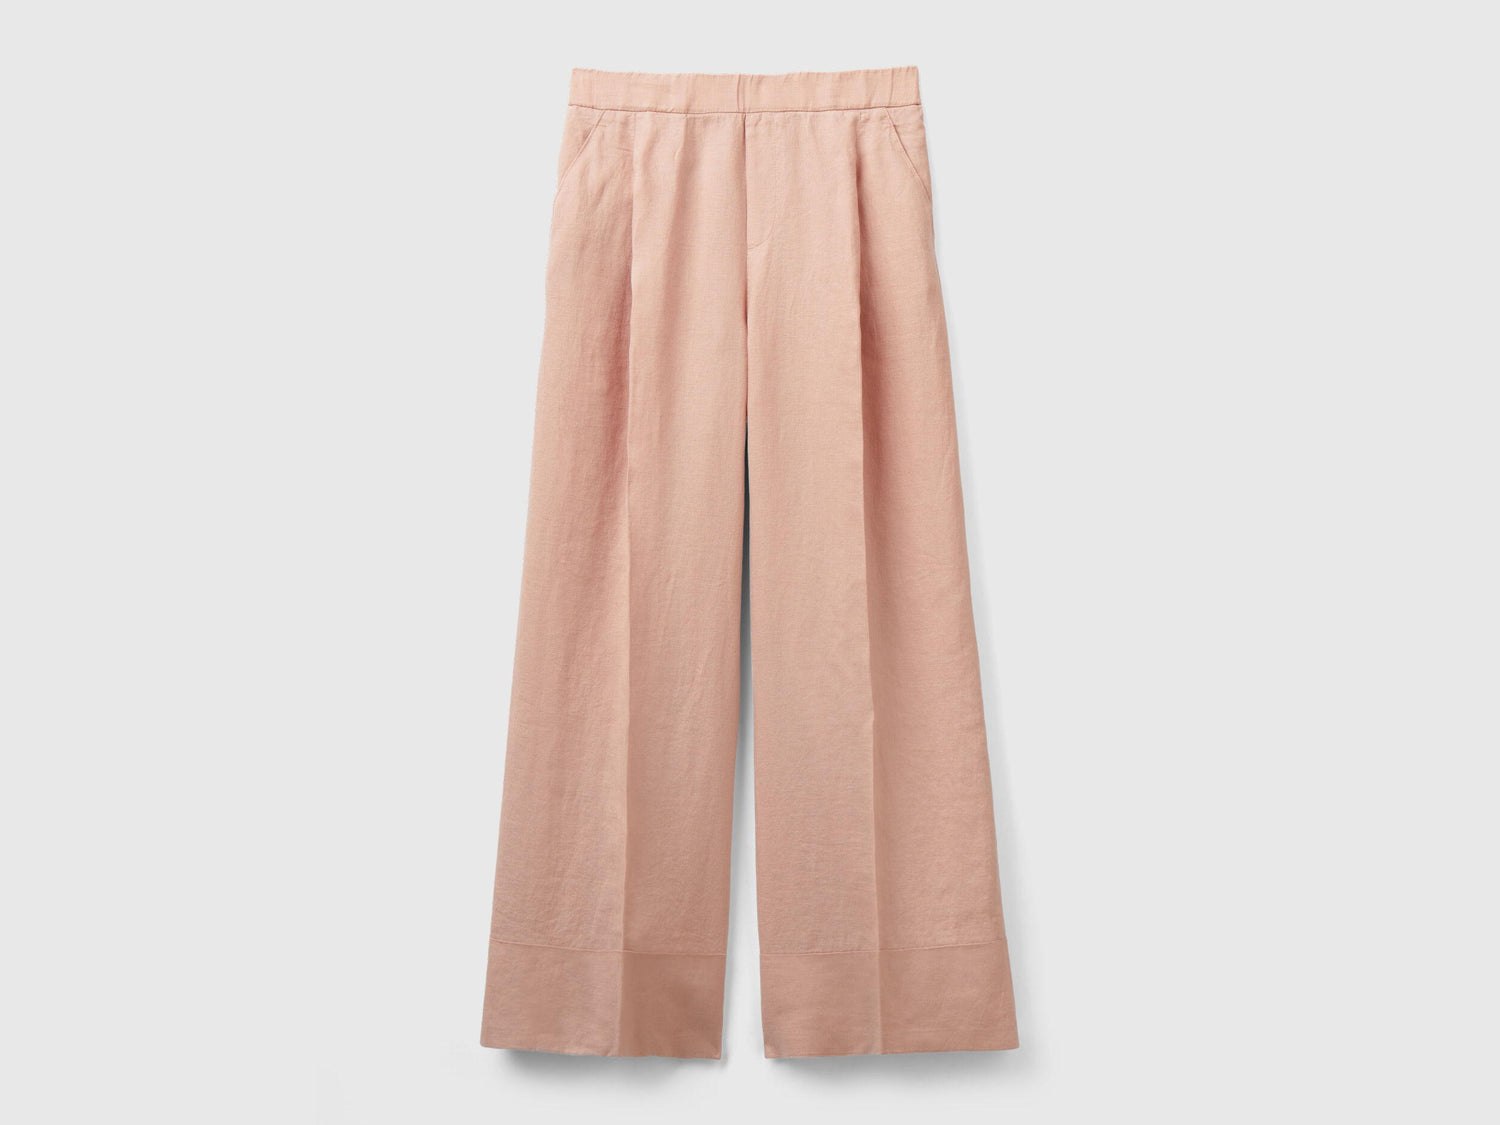 Palazzo Trousers In 100% Linen_4AGHDF016_04W_04